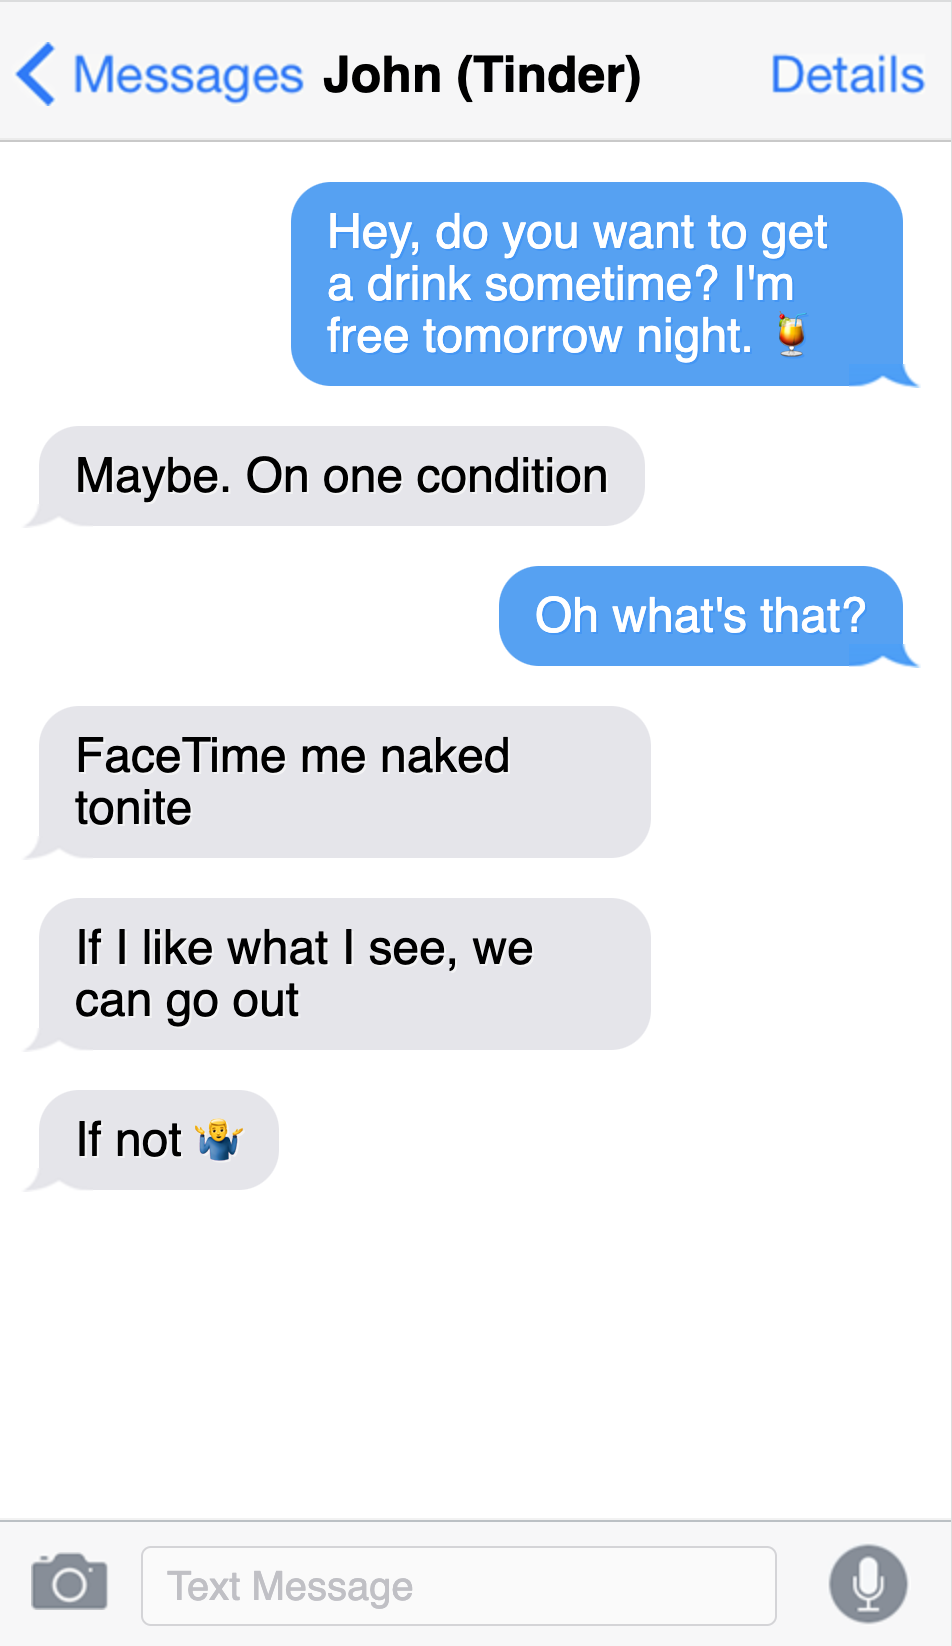 man will only go on a date if the person facetimes them naked first